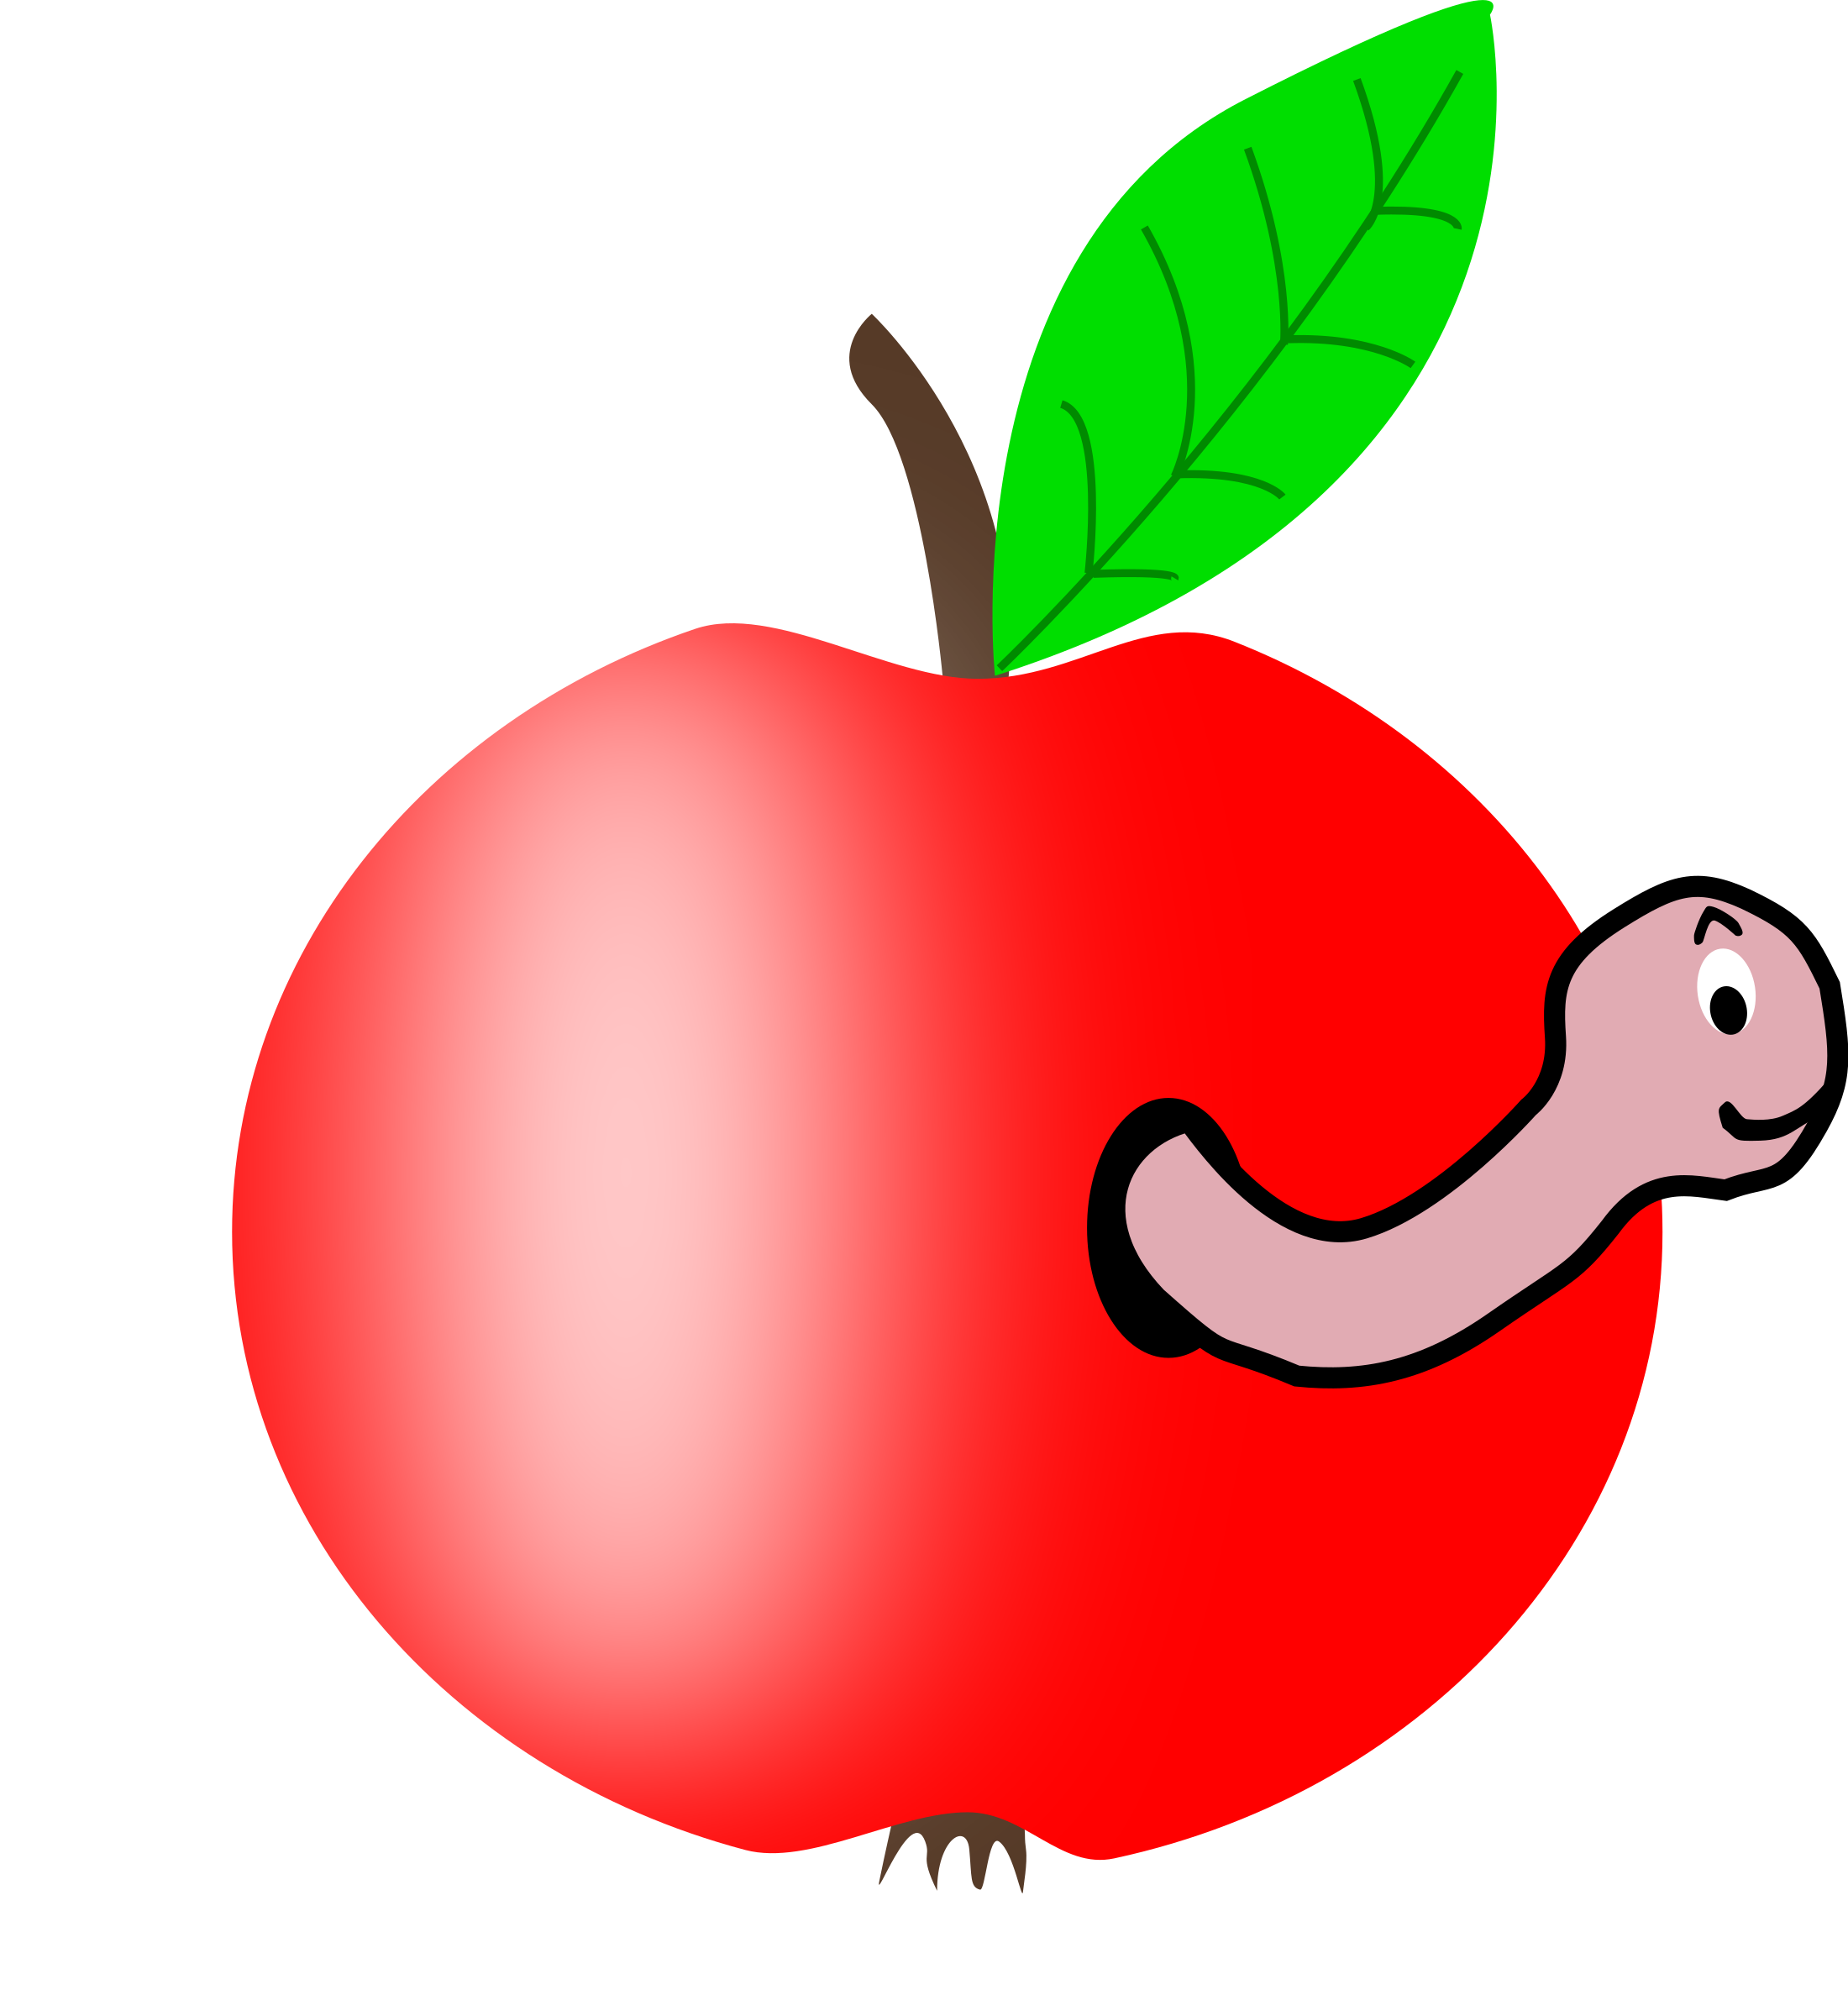 Apple Red with a Green Leaf with funny Worm SVG Clip arts